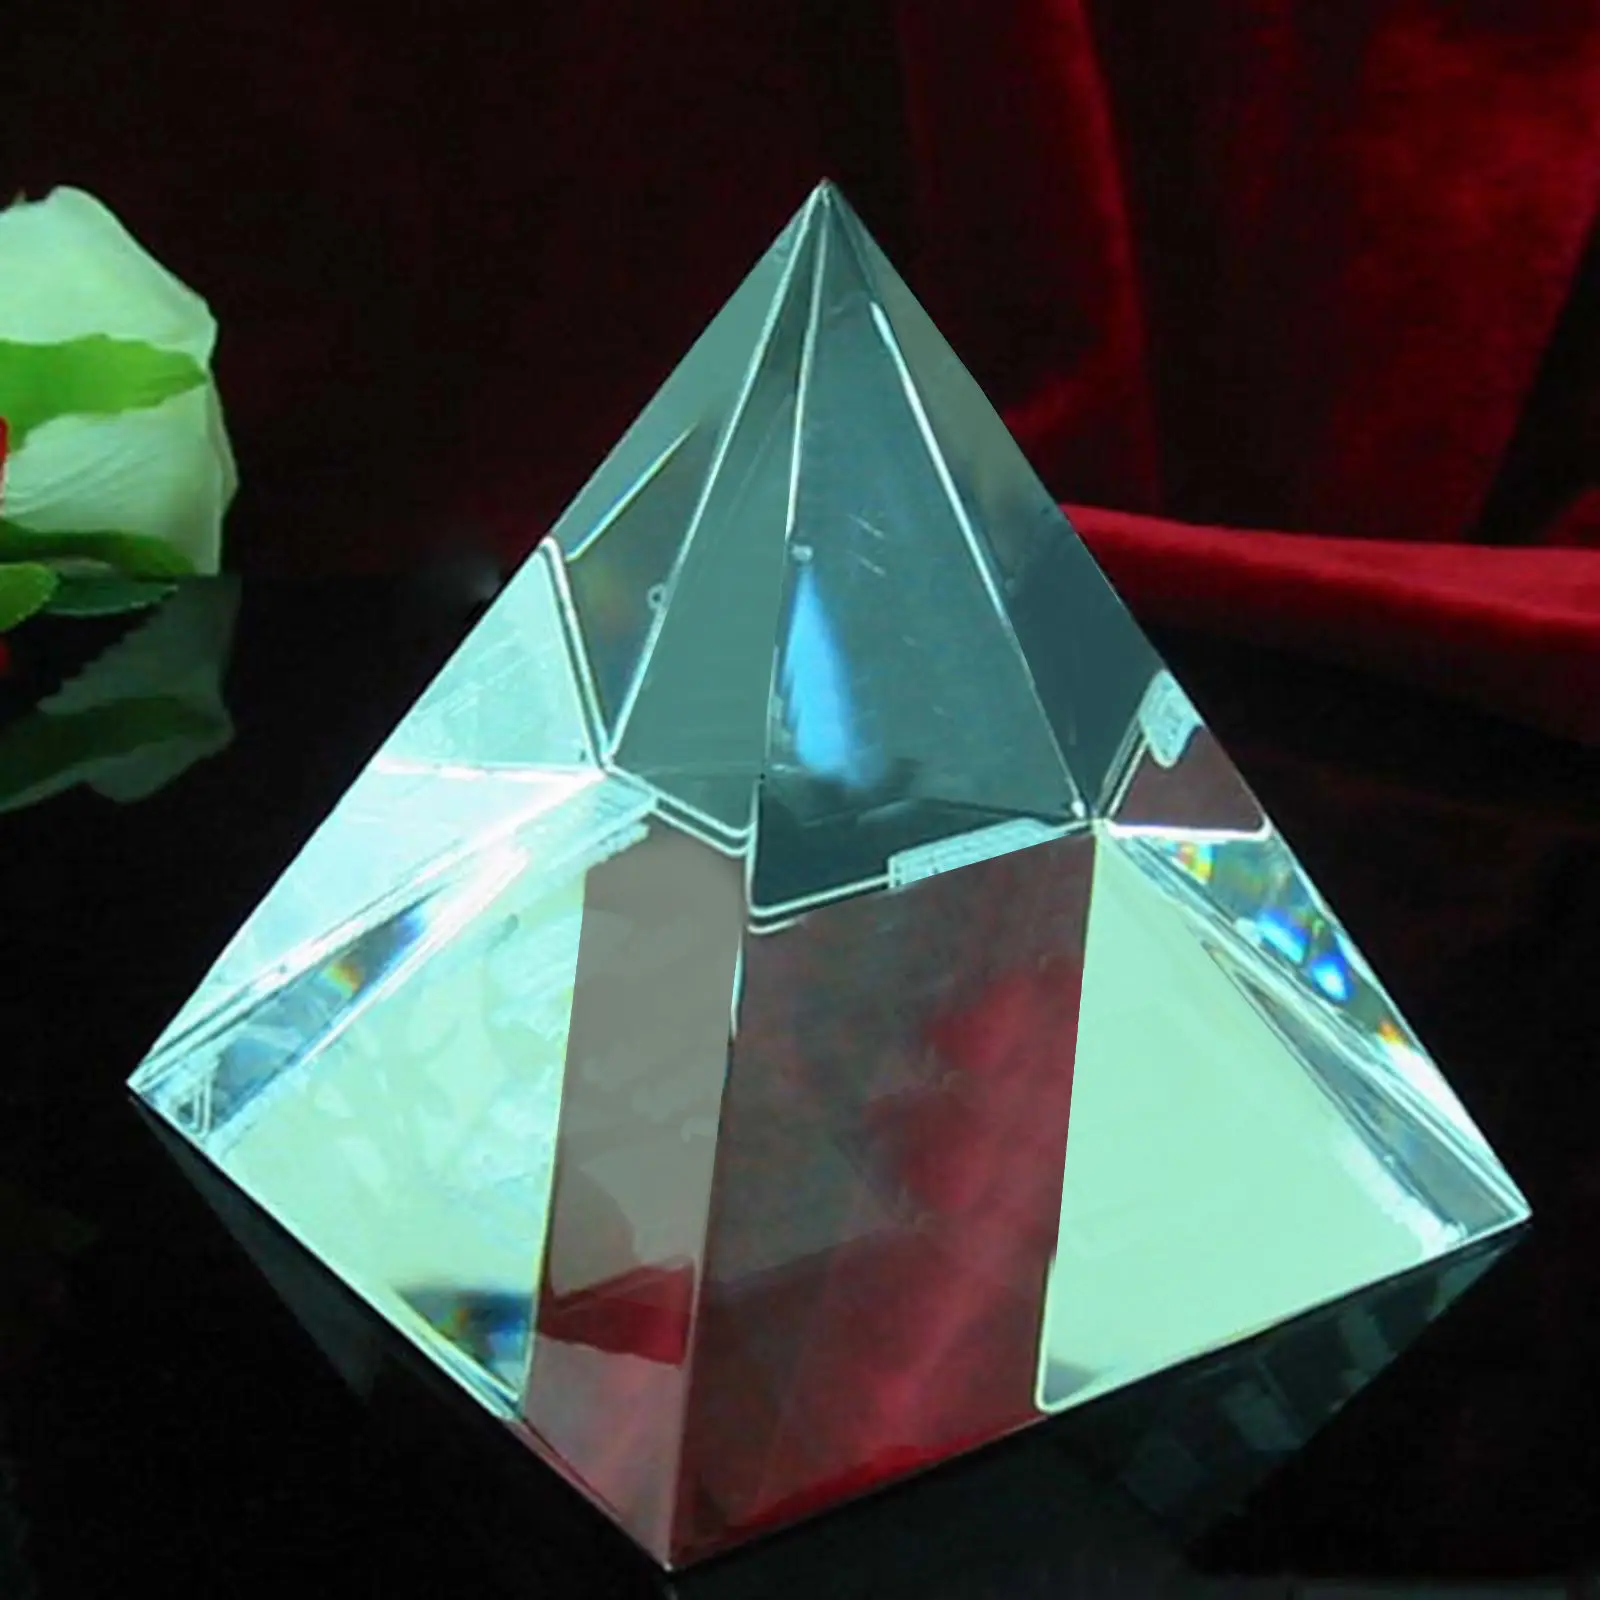 Clear Crystal Pyramid Prism K9 Artificial Crystal Paperweight Home Decor Craft Statue Photography Science Optics DIY